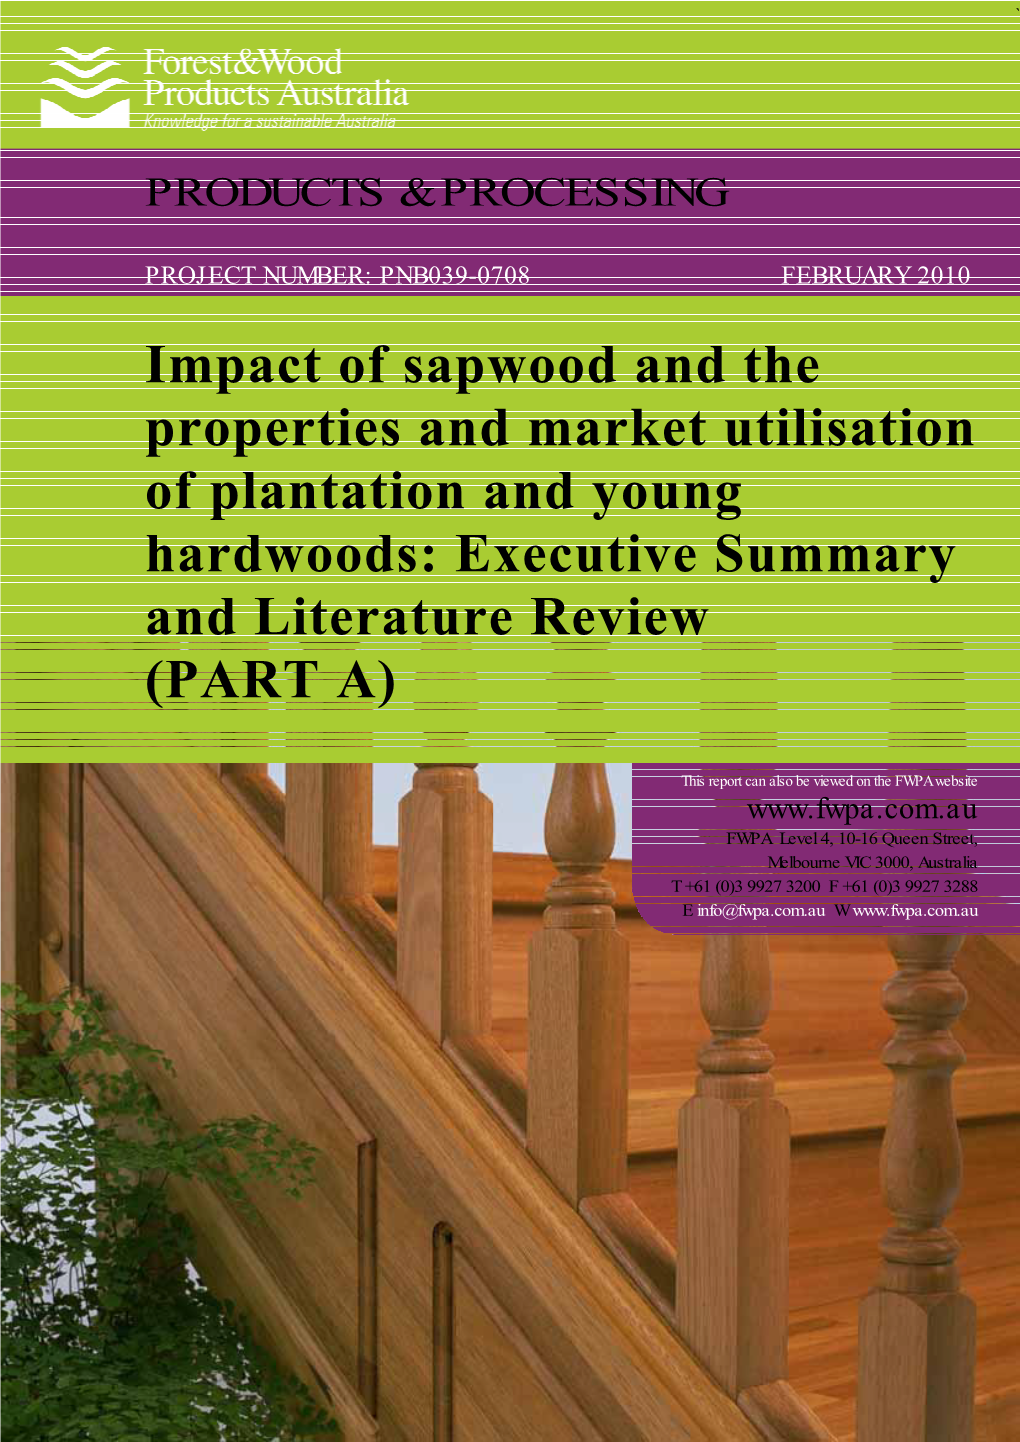 Impact of Sapwood and the Properties and Market Utilisation of Plantation and Young Hardwoods: Executive Summary and Literature Review (PART A)